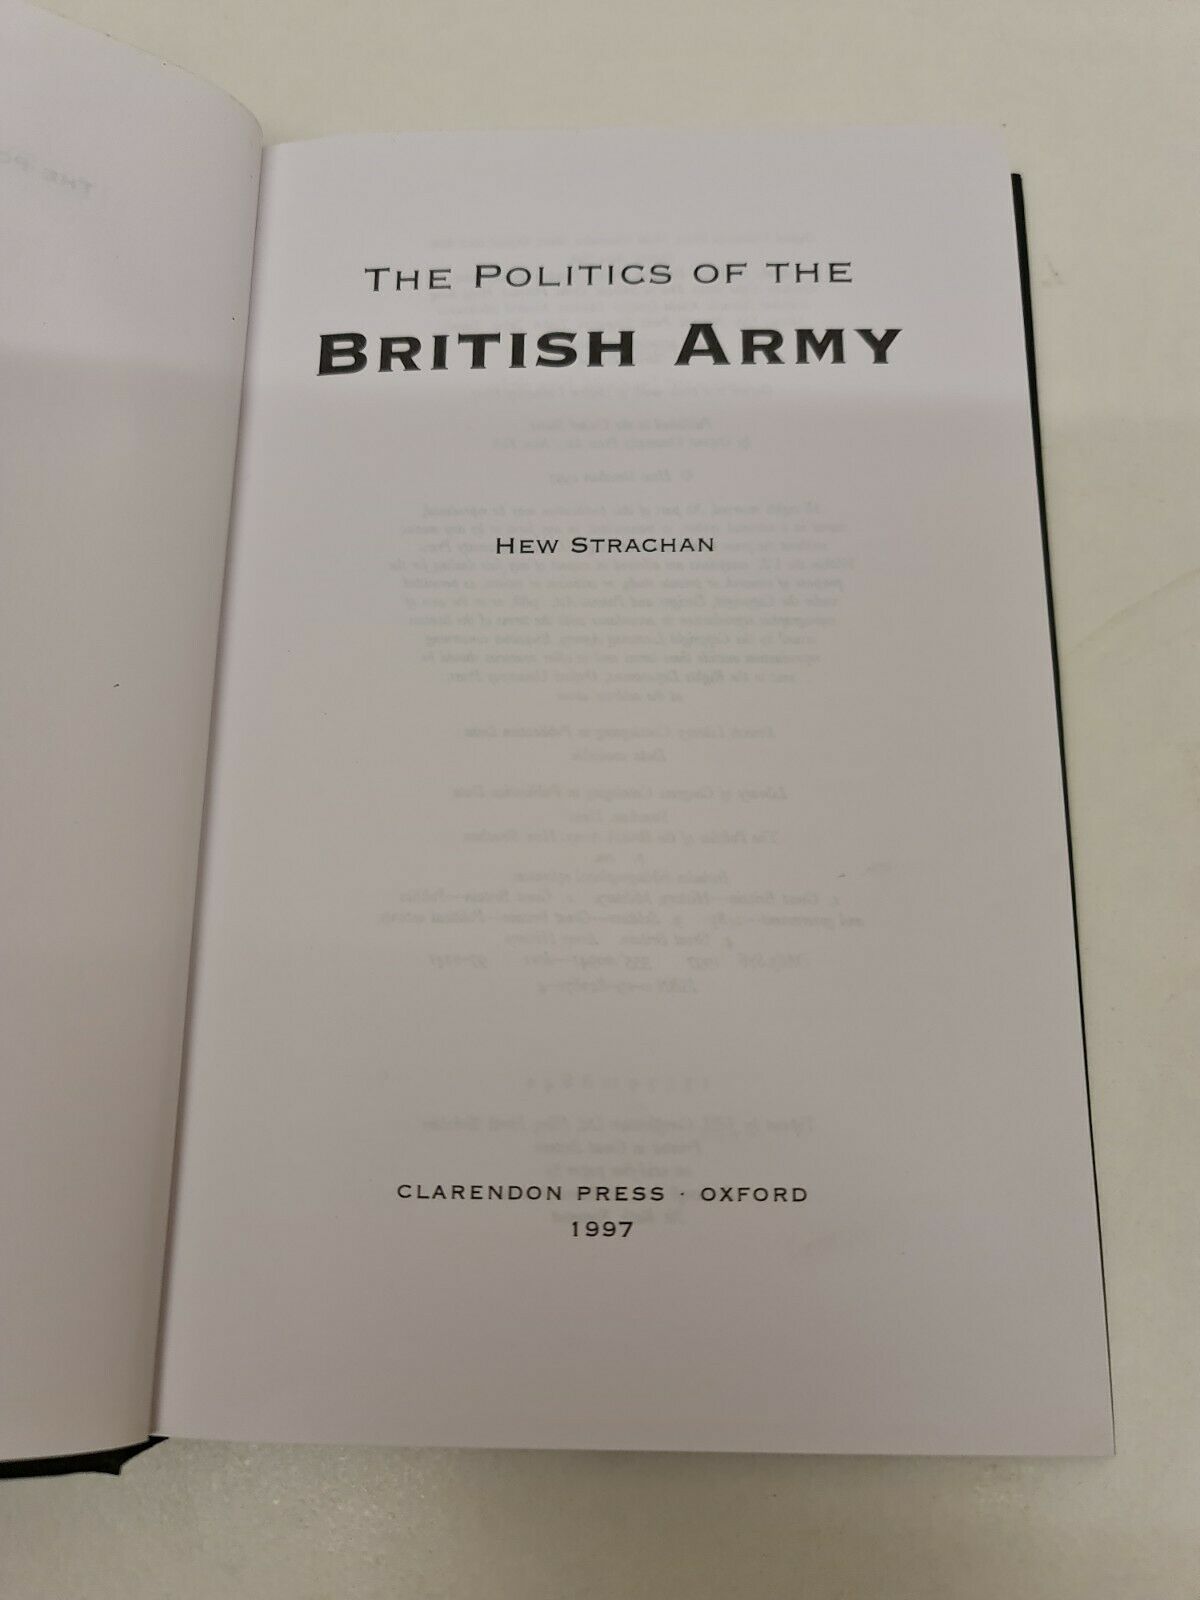 The Politics of the British Army by Sir Hew Strachan